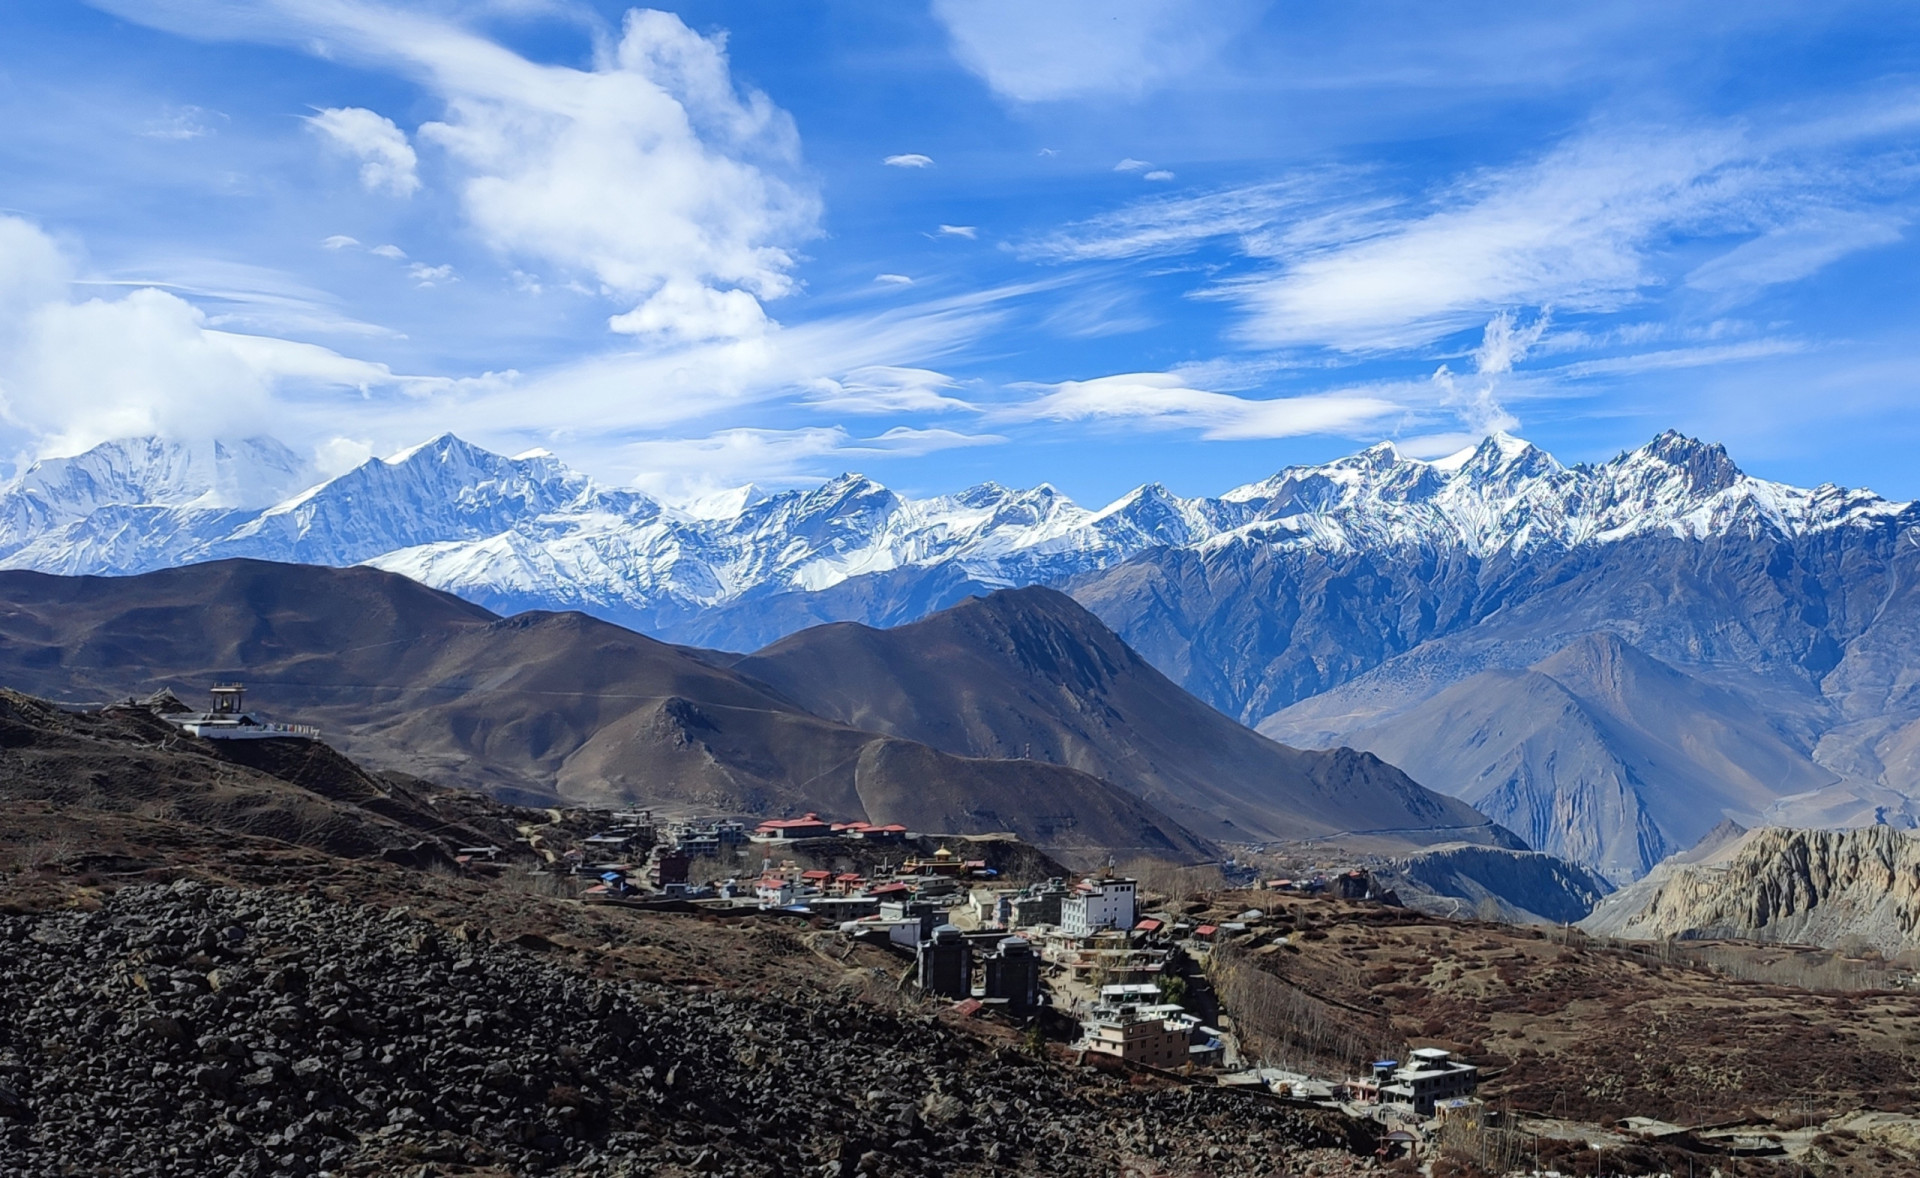 <p>Believe it or not, Nepal's remote Mustang district only opened to outsiders in 1992. Today, a select collection of stunning hotel properties cater to the more discerning traveler, visitors who, while appreciating a touch of luxury, still want to trek the surrounding mountains or discover the countryside on horseback.</p><p>You may also like:<a href="https://www.starsinsider.com/n/341350?utm_source=msn.com&utm_medium=display&utm_campaign=referral_description&utm_content=636762en-en"> Daily habits that might be harming your brain</a></p>